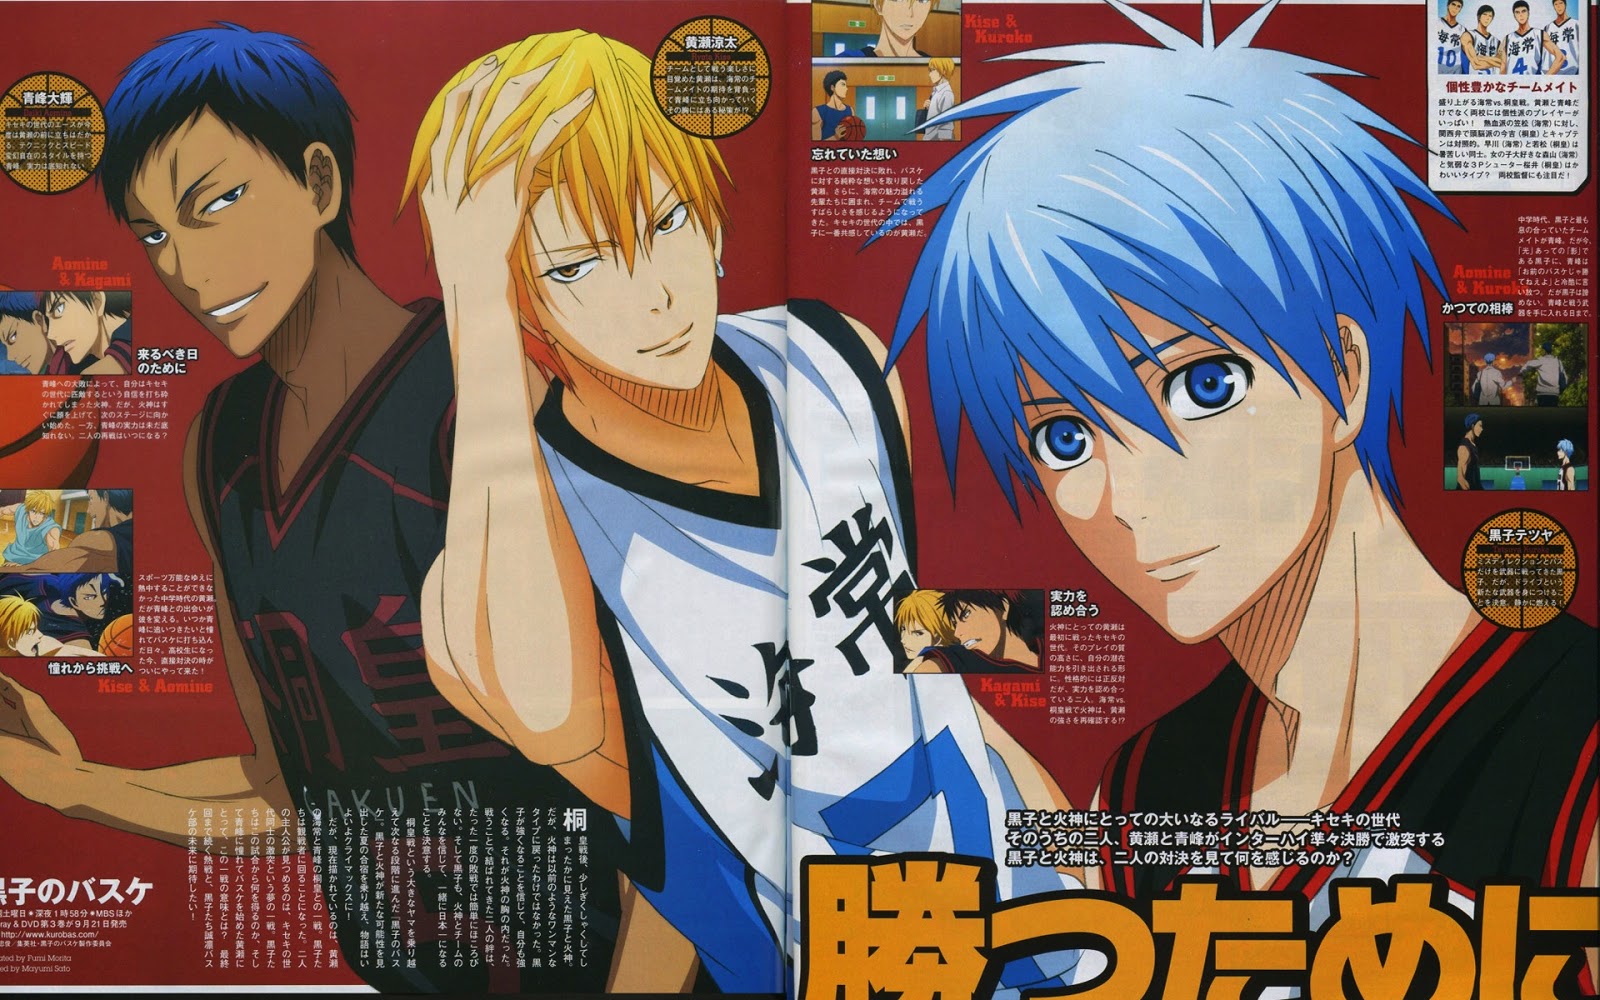 Ellmond S Collection Hd Animation Wallpapers Pictures 高清动漫壁纸 图片 The Basketball Which Kuroko Plays 黑子的篮球